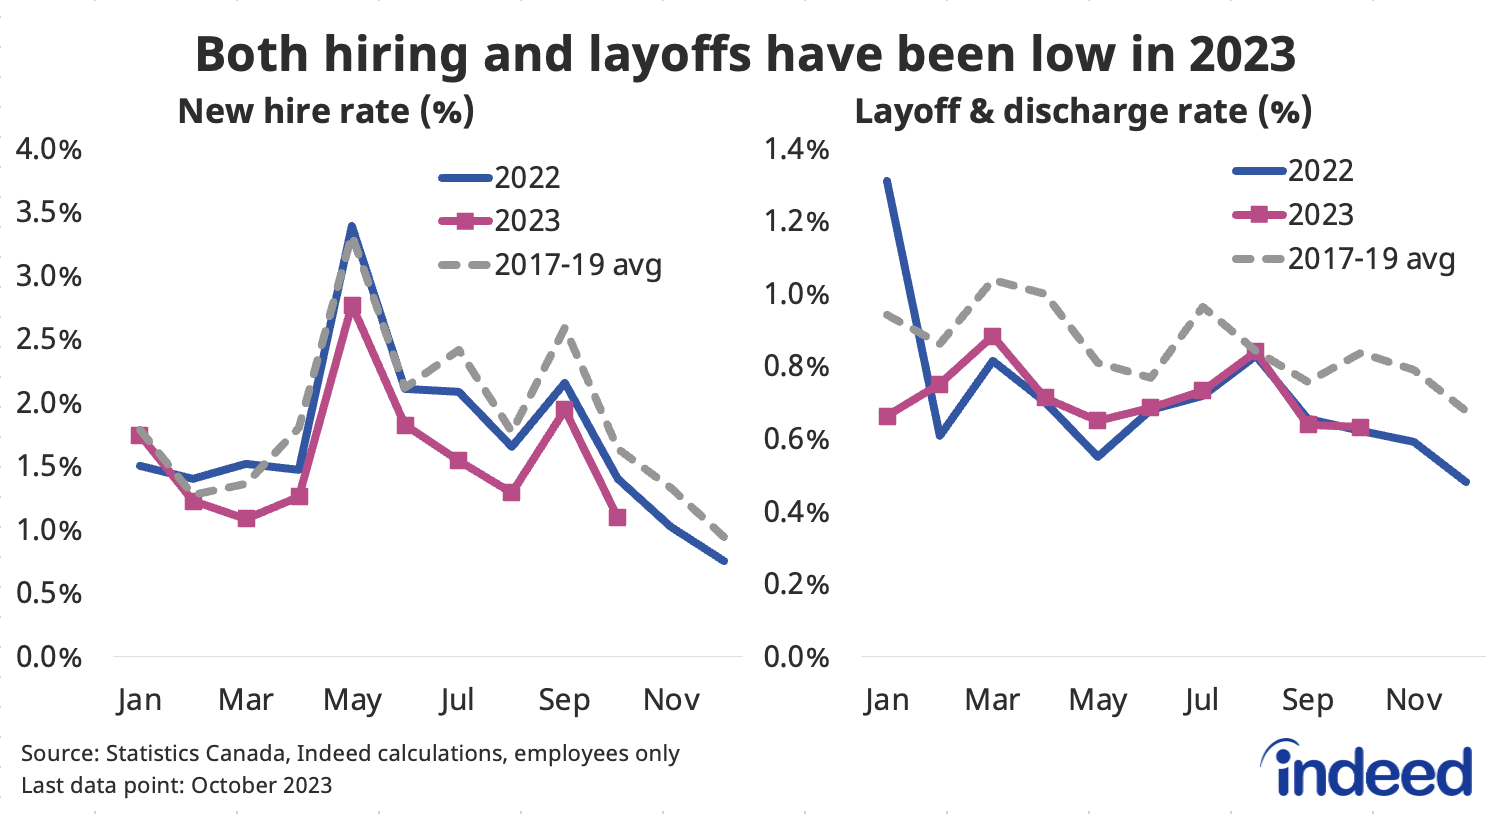 Two-panel line graph titled “Both hiring and layoffs have been low in 2023,” with the left panel showing the monthly new hire rate, and the right panel showing the monthly layoff and discharge rate. Each panel contains three lines, representing the respective monthly rate for 2022, 2023, and the average between 2017 and 2019. The new hire rate has been below 2022 and 2017-2019 averages since February 2023, while the layoff rate has been similar in 2022 and 2023, well below the 2017-2019 average. 